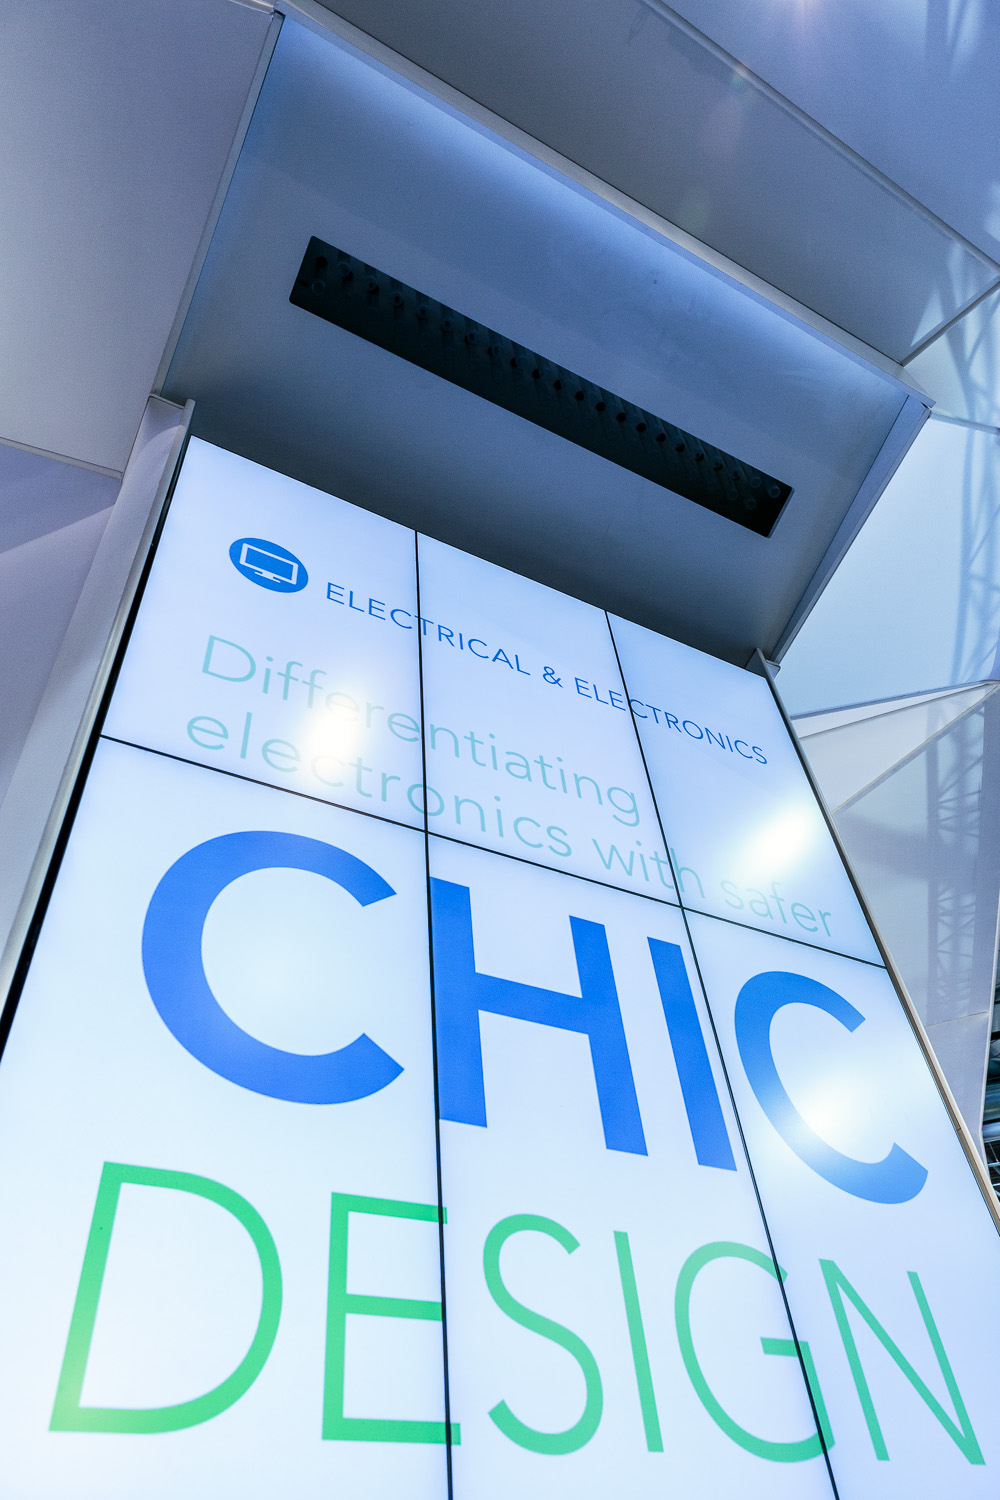 Screen showing "Chic Design"